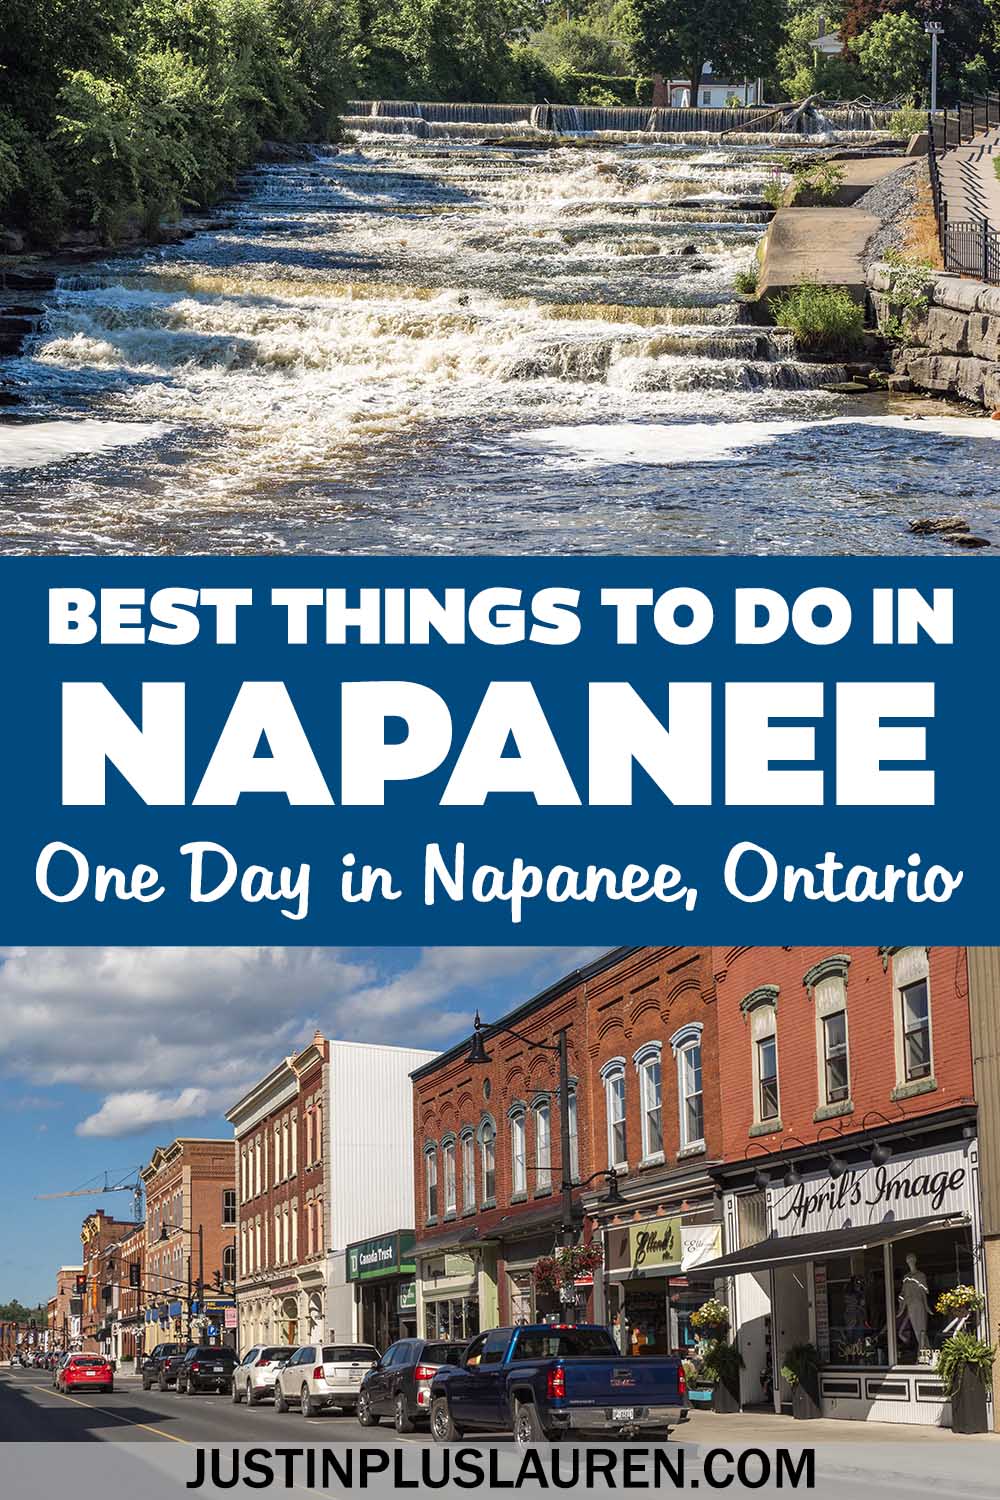 Here are the best things to do in Napanee, Ontario for an amazing day. See a beautiful waterfall, go for a pontoon river cruise and more!